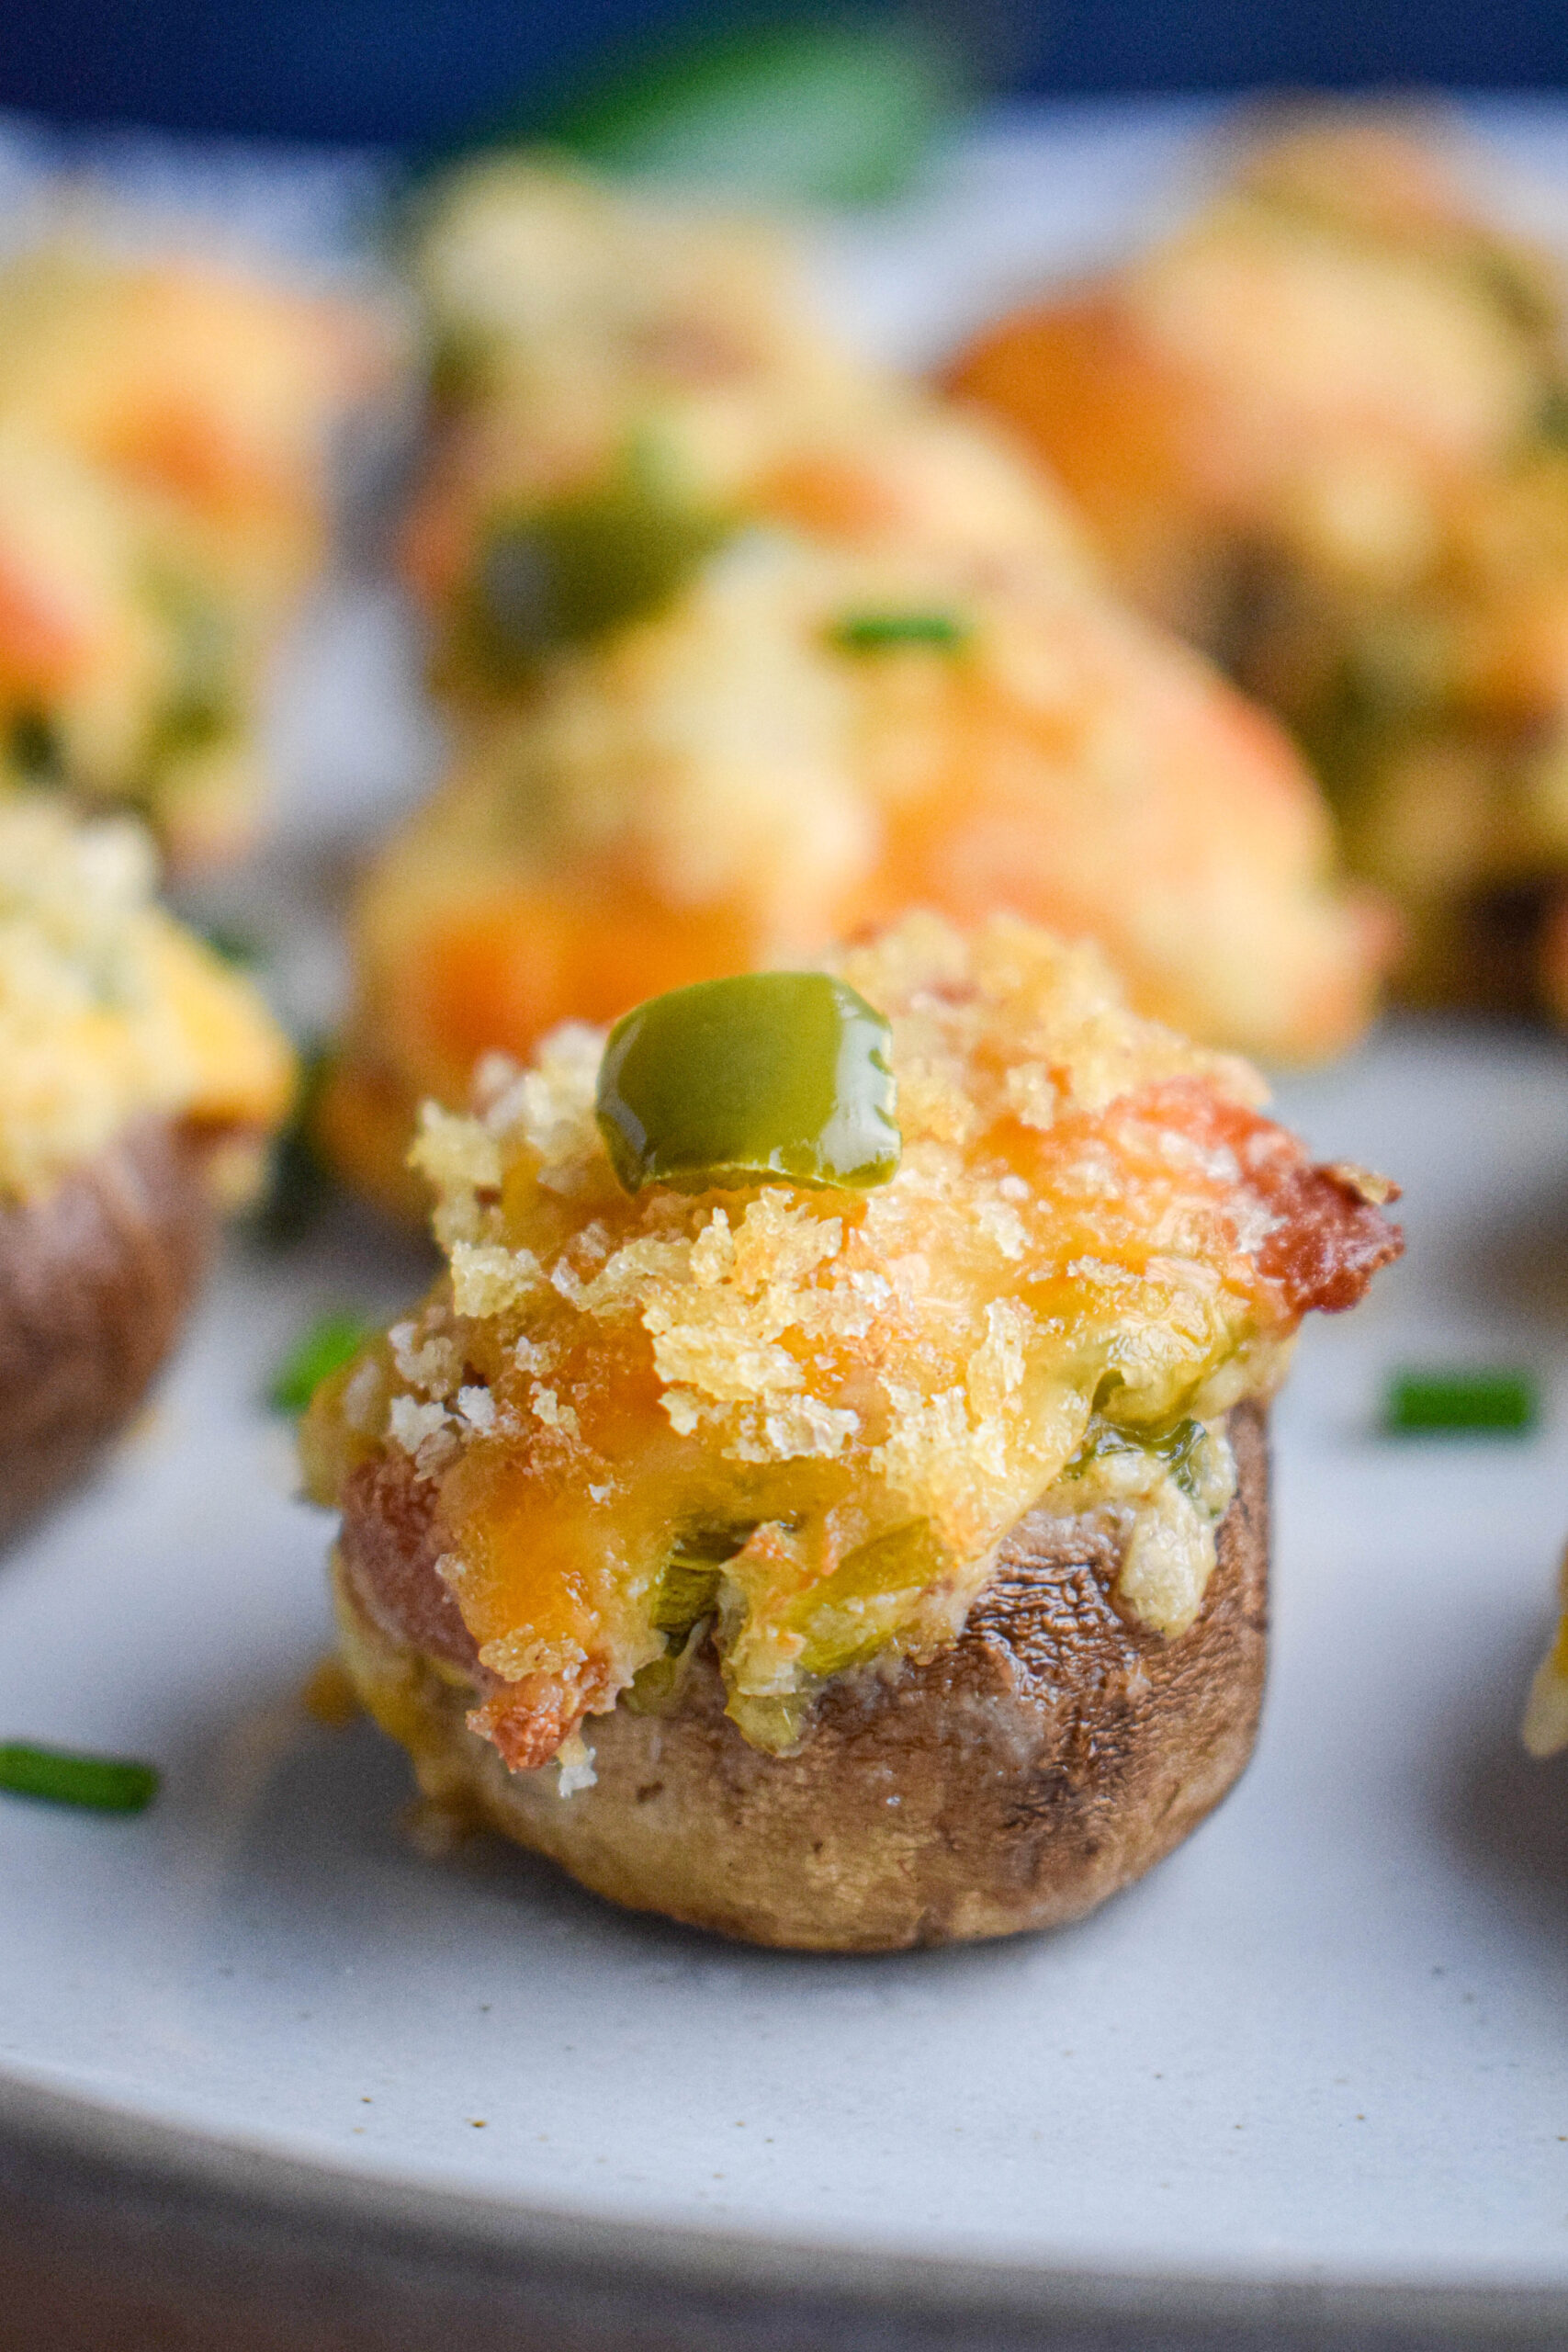 baked golden brown jalapeno bacon and cream cheese stuffed mushroom stopped with cheese, panko breadcrumbs and peppers